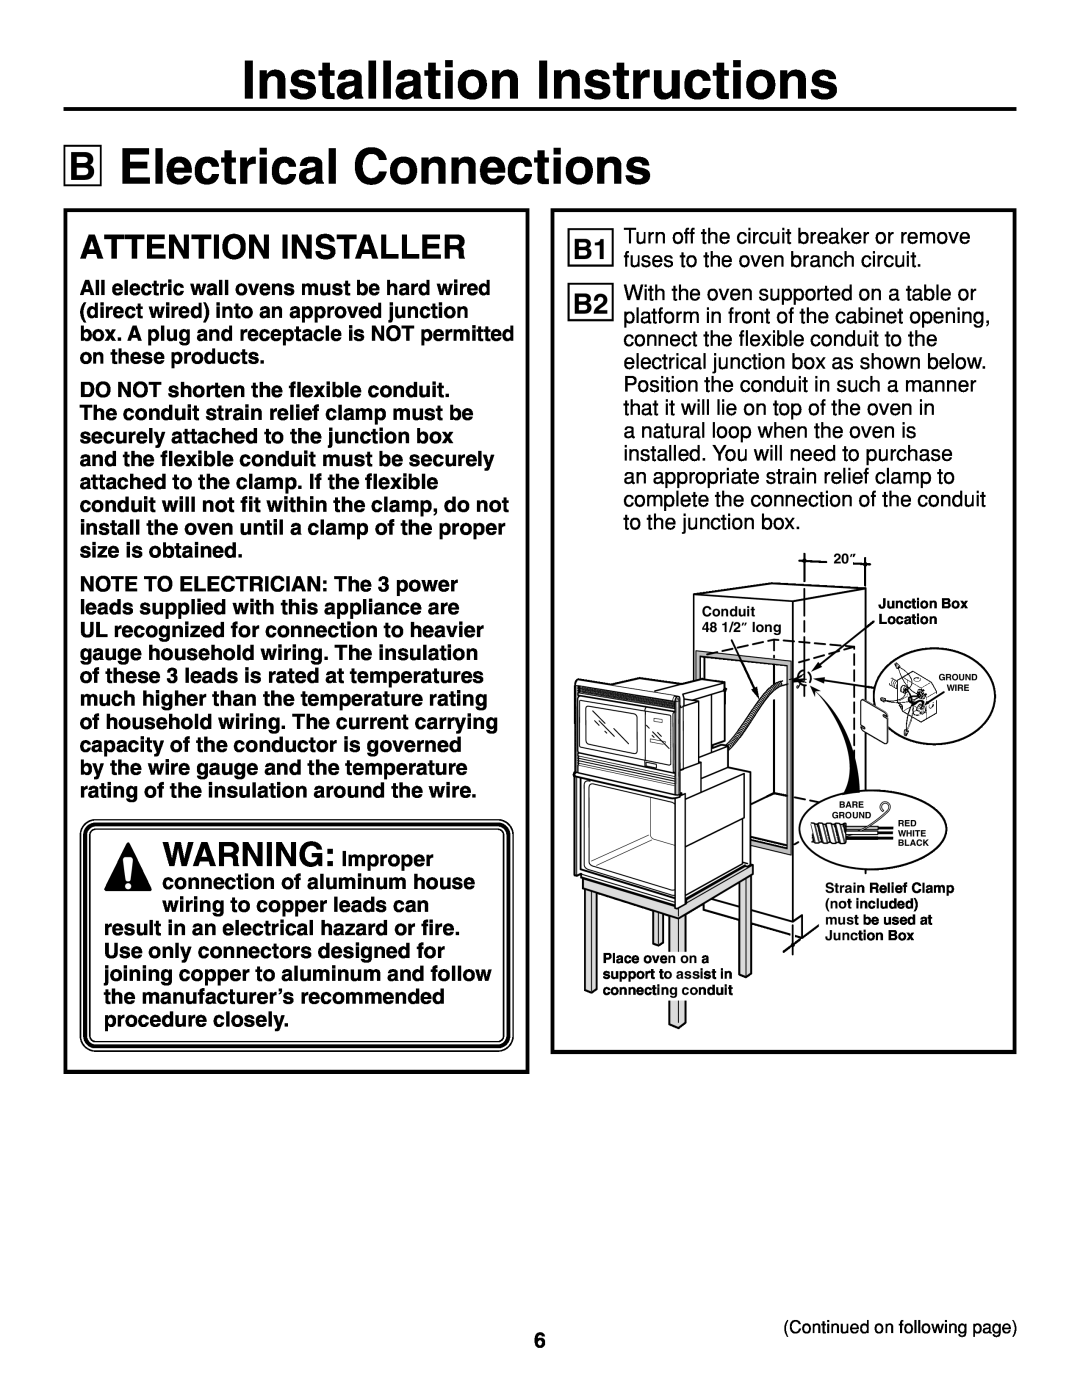 GE JTP86 installation instructions Electrical Connections, WARNING Improper, Installation Instructions, Attention Installer 